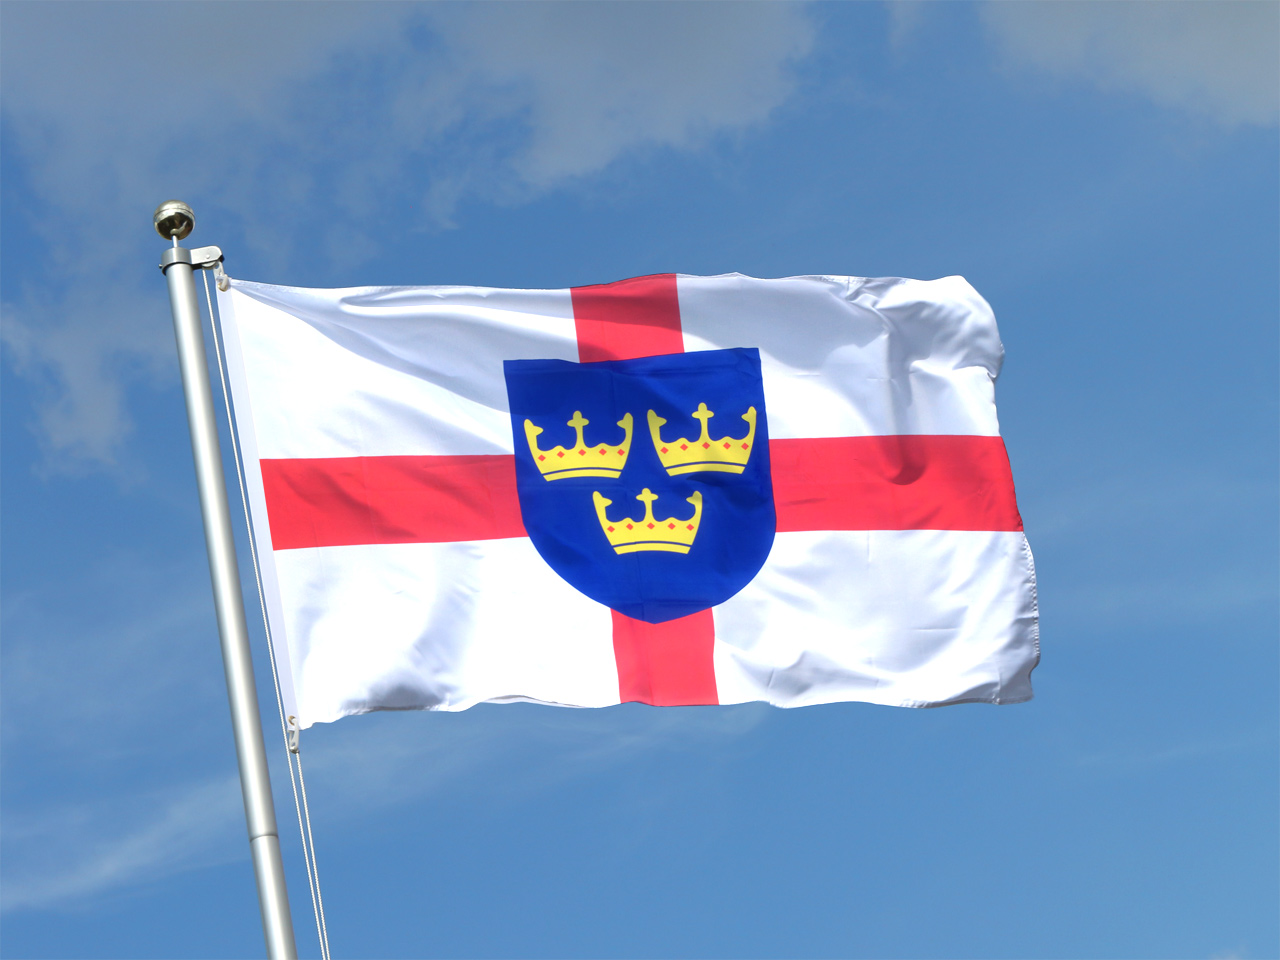 East Anglia Flag for Sale - Buy online at Royal-Flags